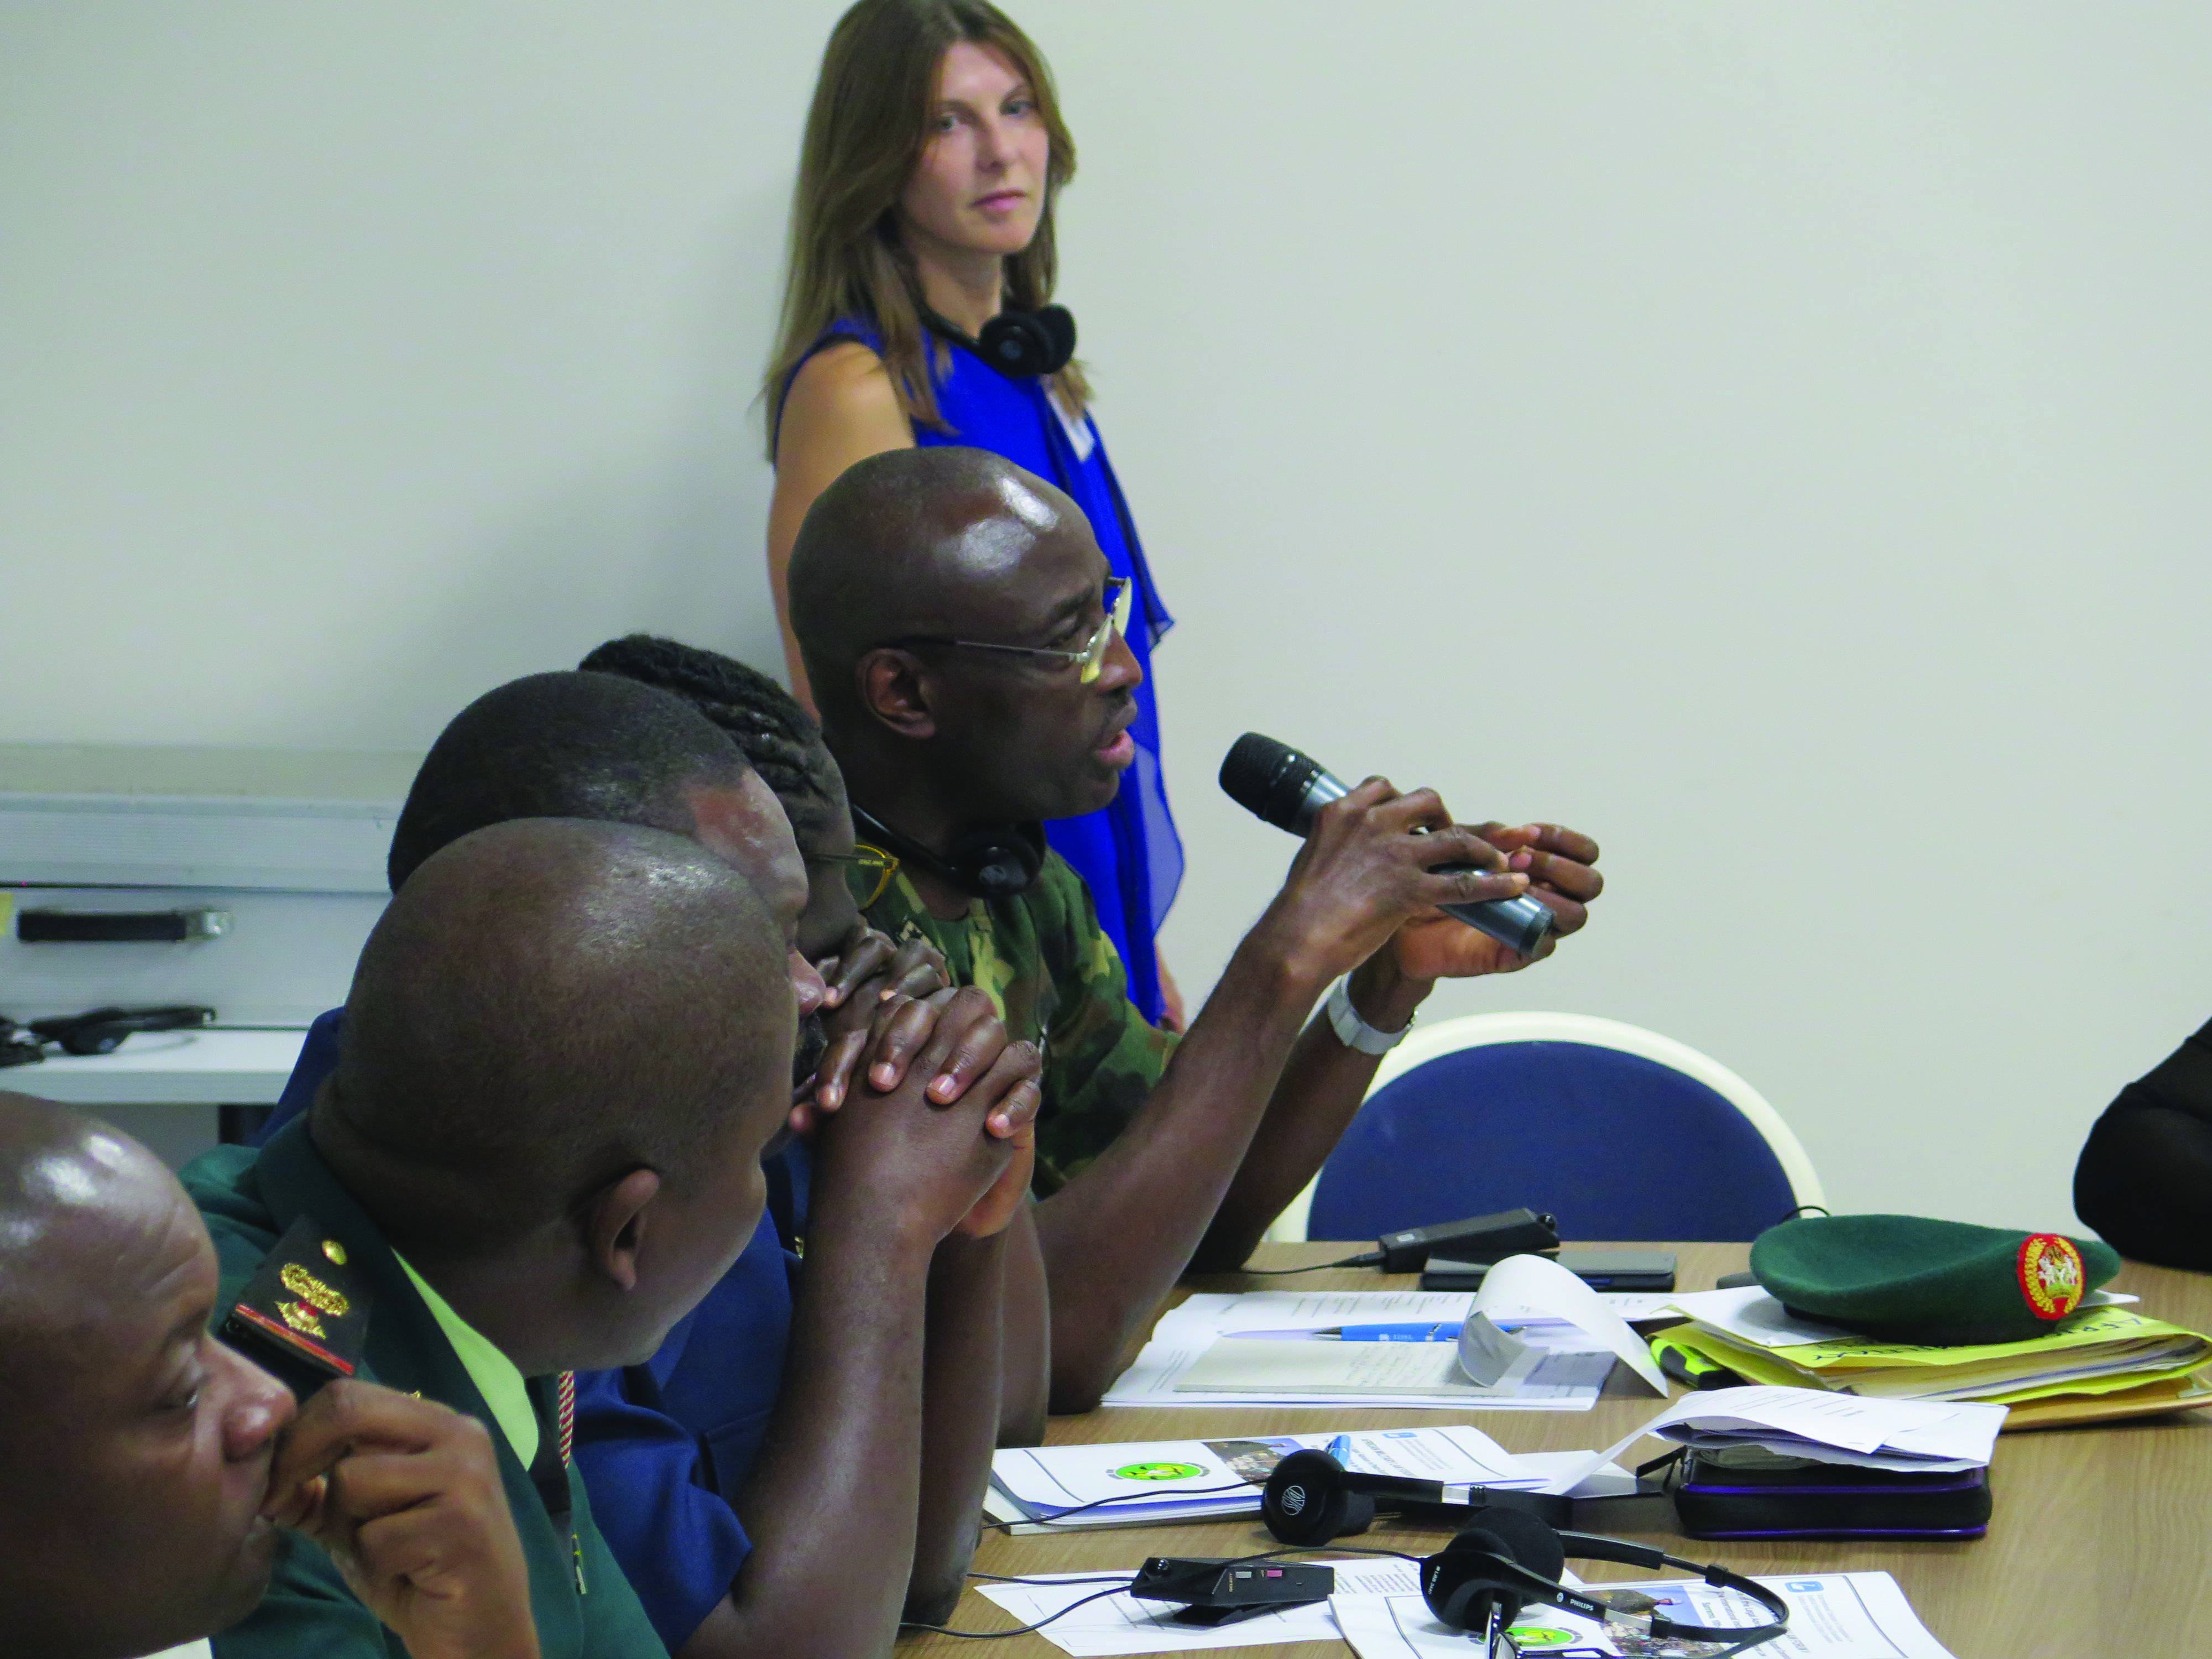 Brigadier General Yosef Shalangwe, TJAG,
        Nigerian Armed Forces, addresses the fifth Africa
        Military Law Forum with Ms. Sandra Franzblau
        facilitating, at the International Institute for
        Humanitarian Law, Sanremo, Italy, 12 September
        2019. (Photo courtesy of Sandra Franzblau)